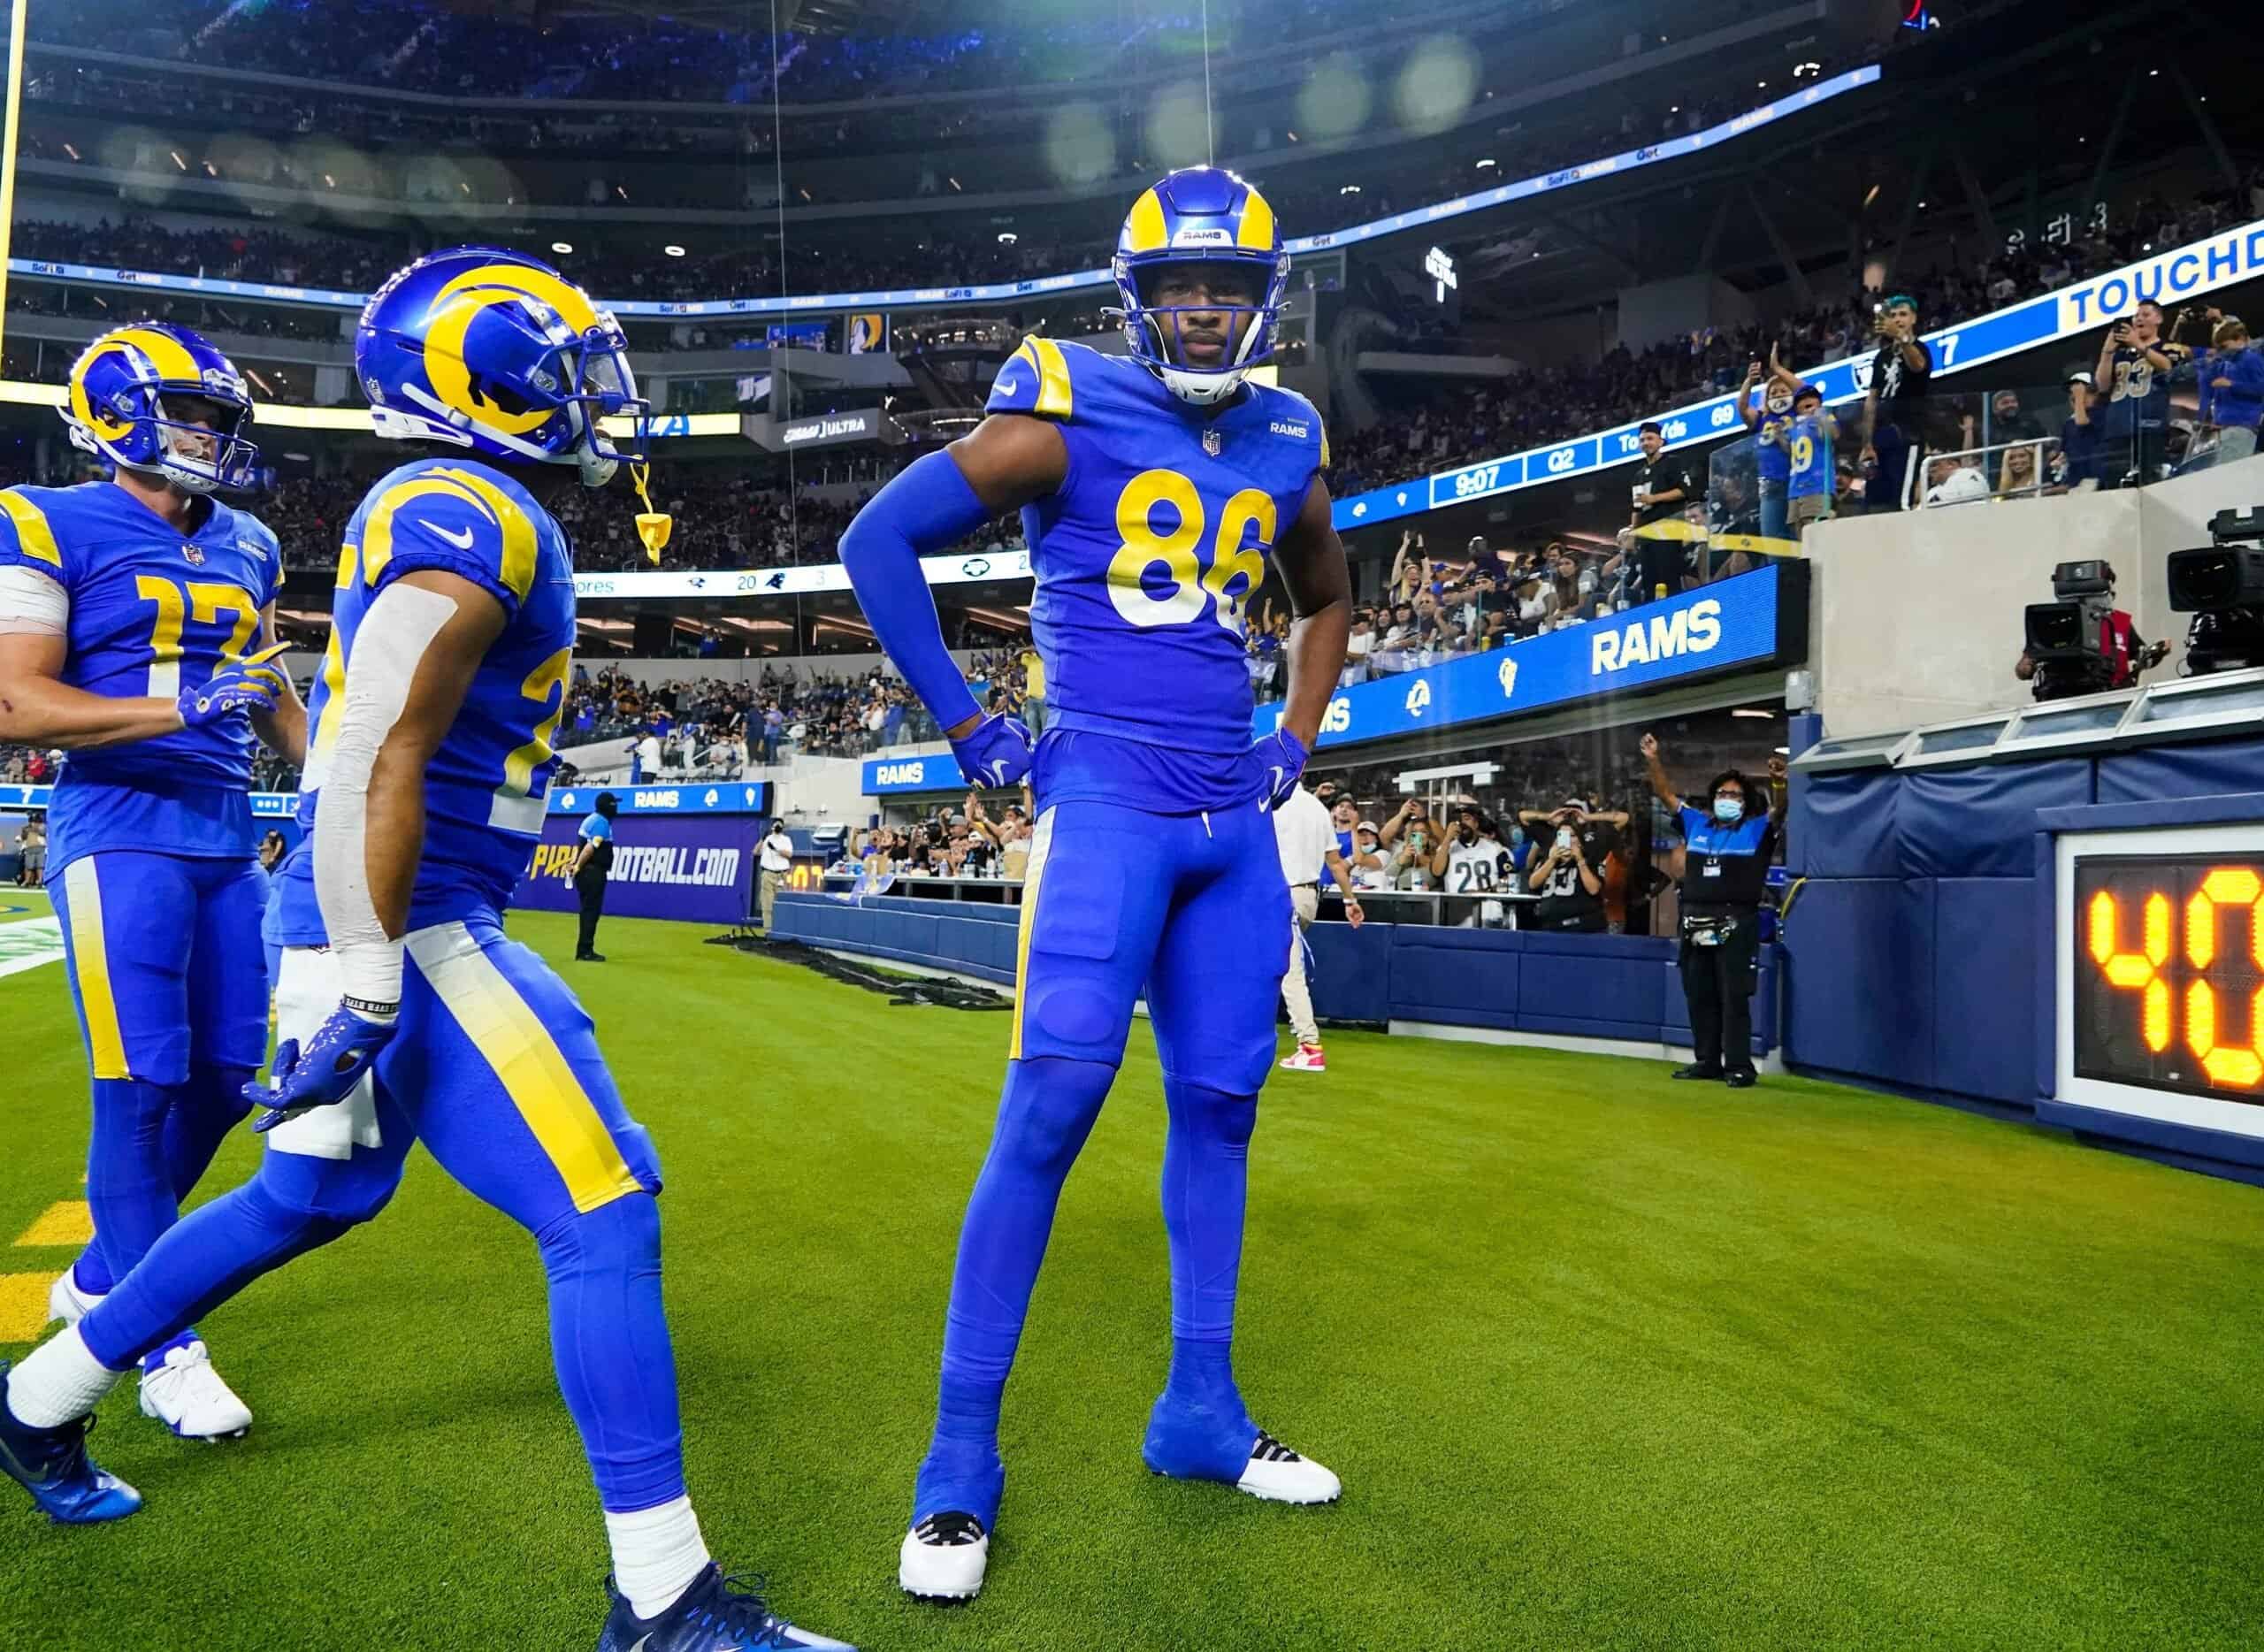 Rams new 2021 uniform: Could it be midnight black? Please?